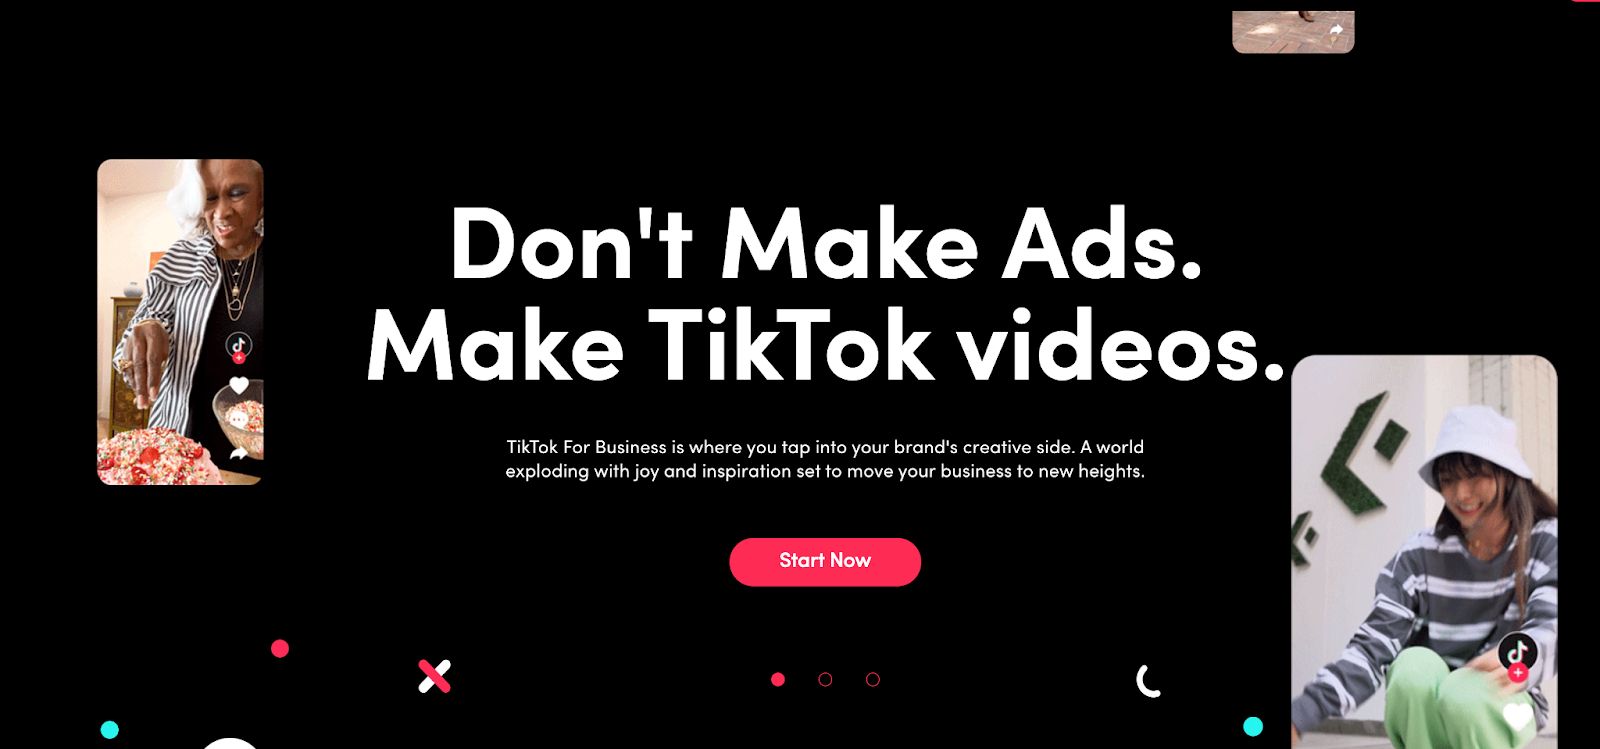 TikTok for ecommerce marketing encourages organic-looking ads that don’t disrupt a user’s experience. 